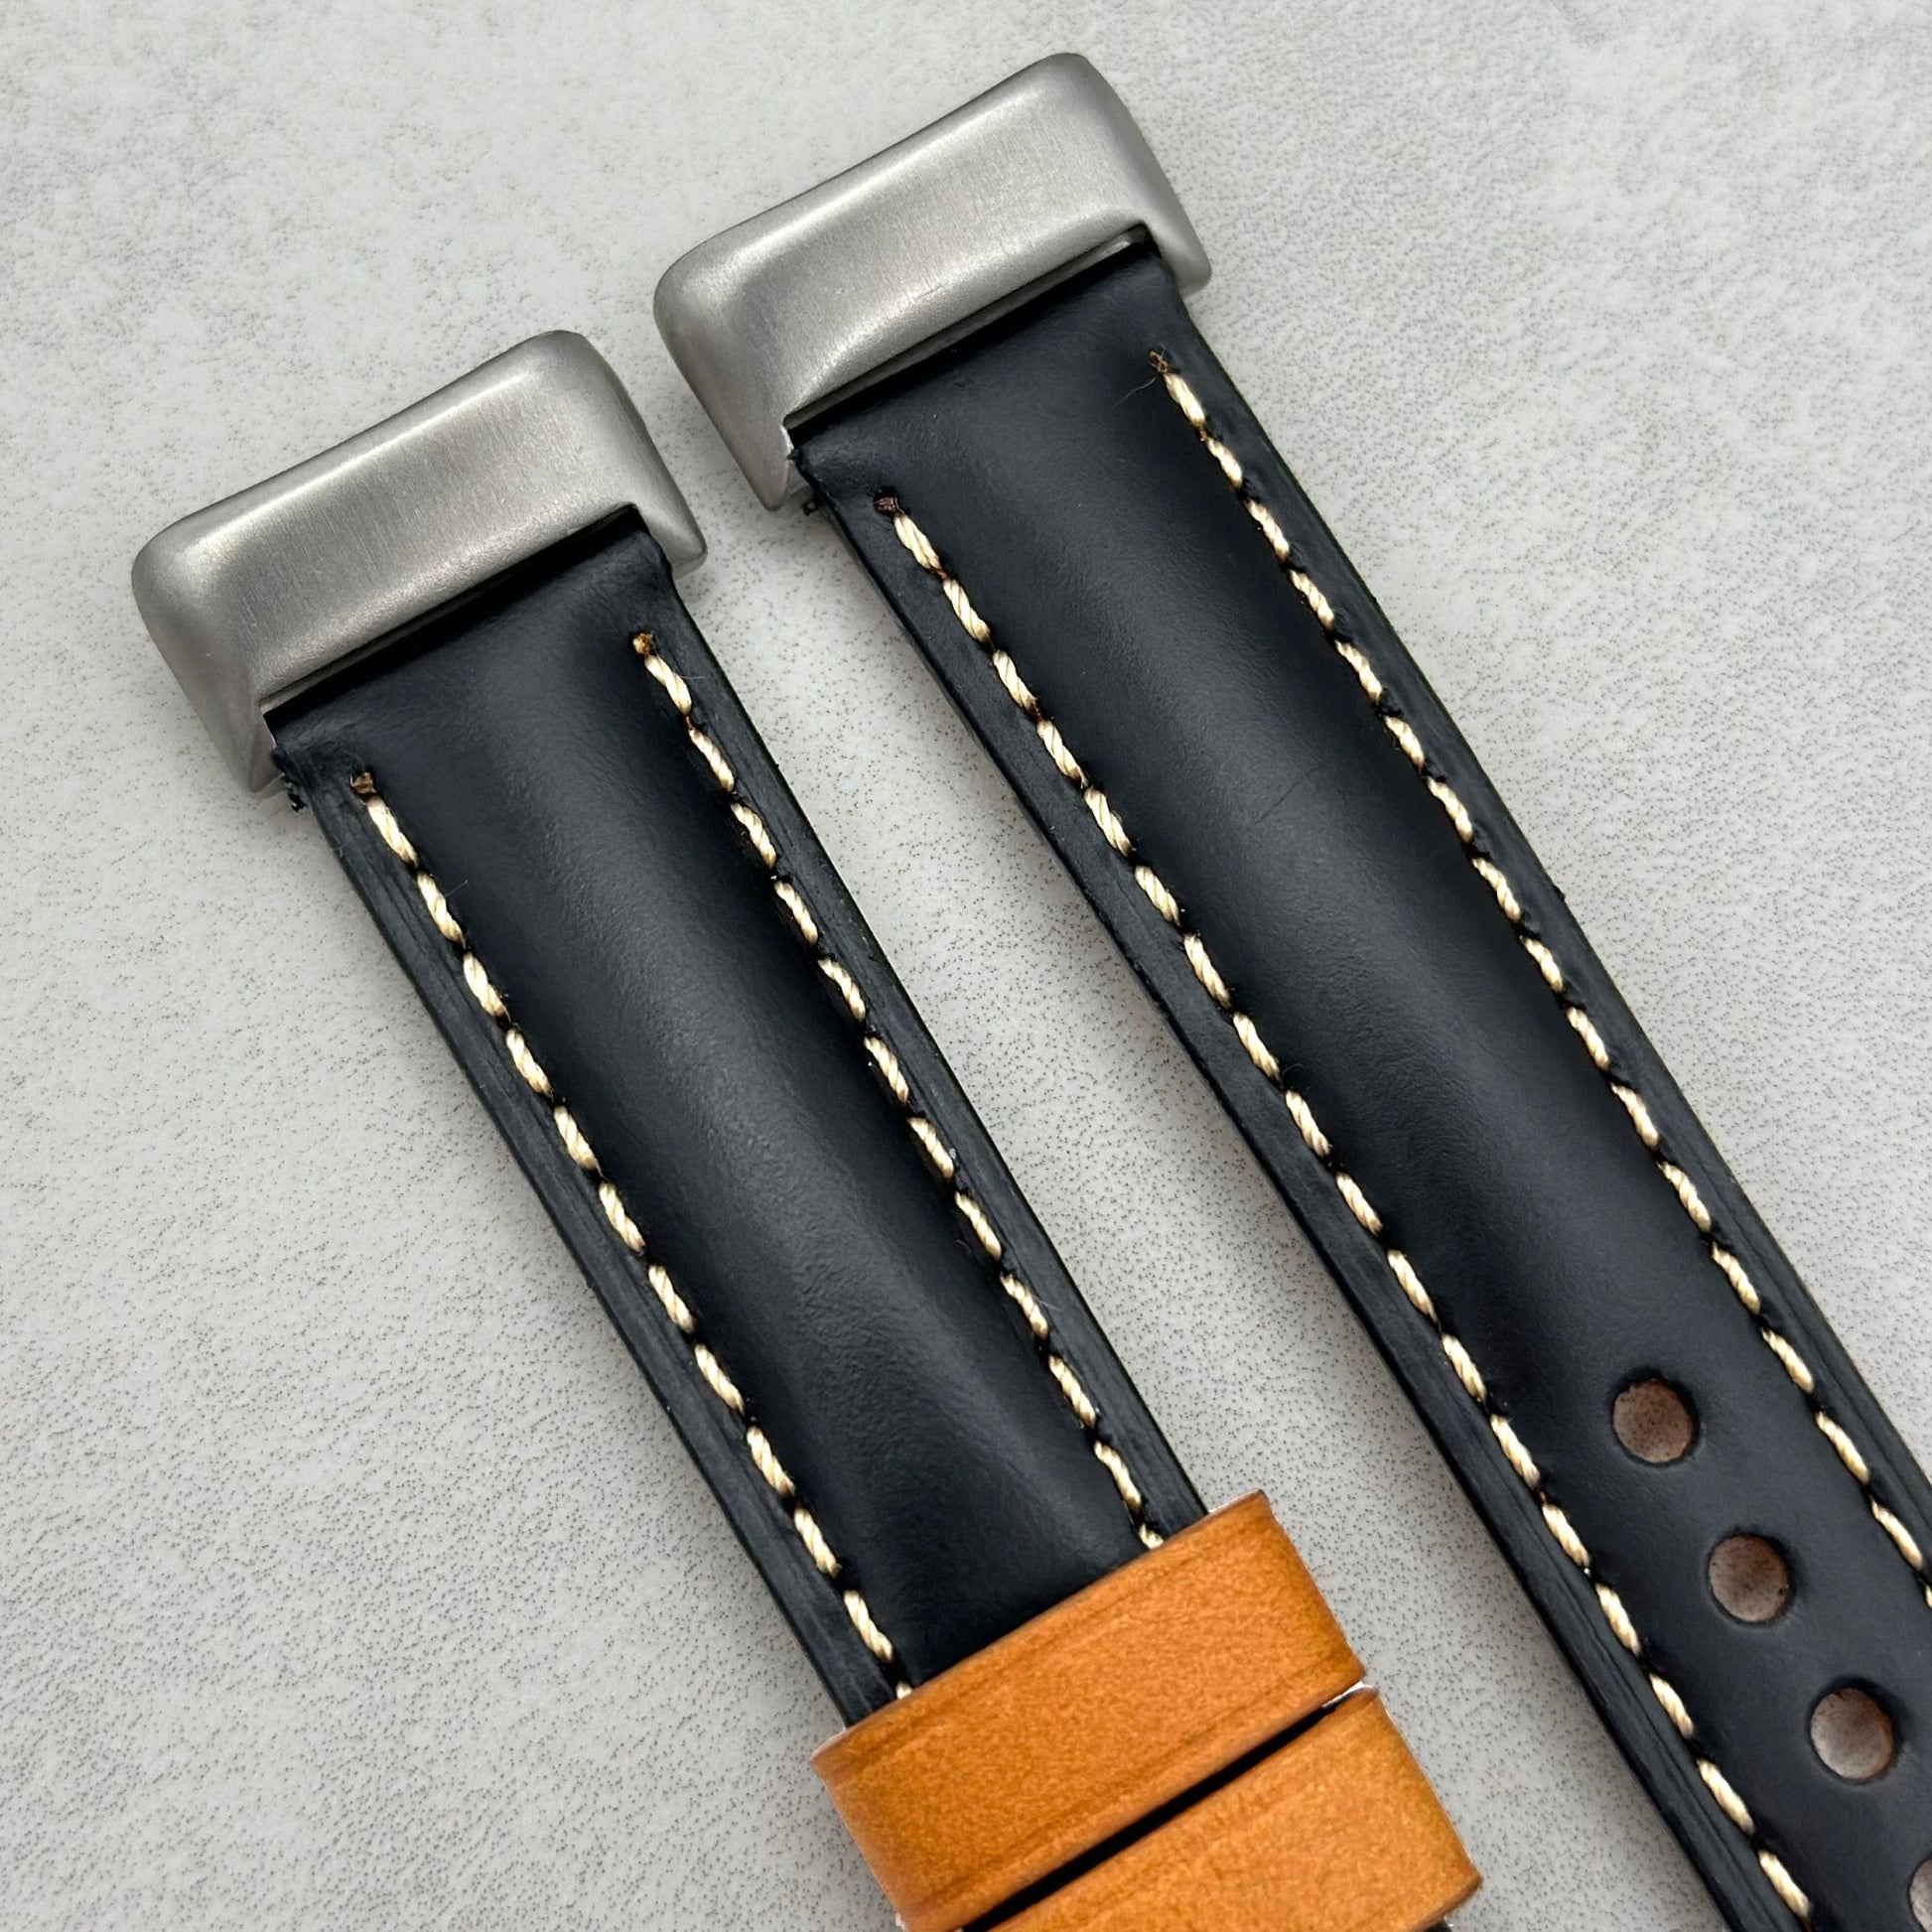 Top of the Oxford jet black full grain leather Fitbit Charge strap. Contrast ivory stitching. Watch And Strap